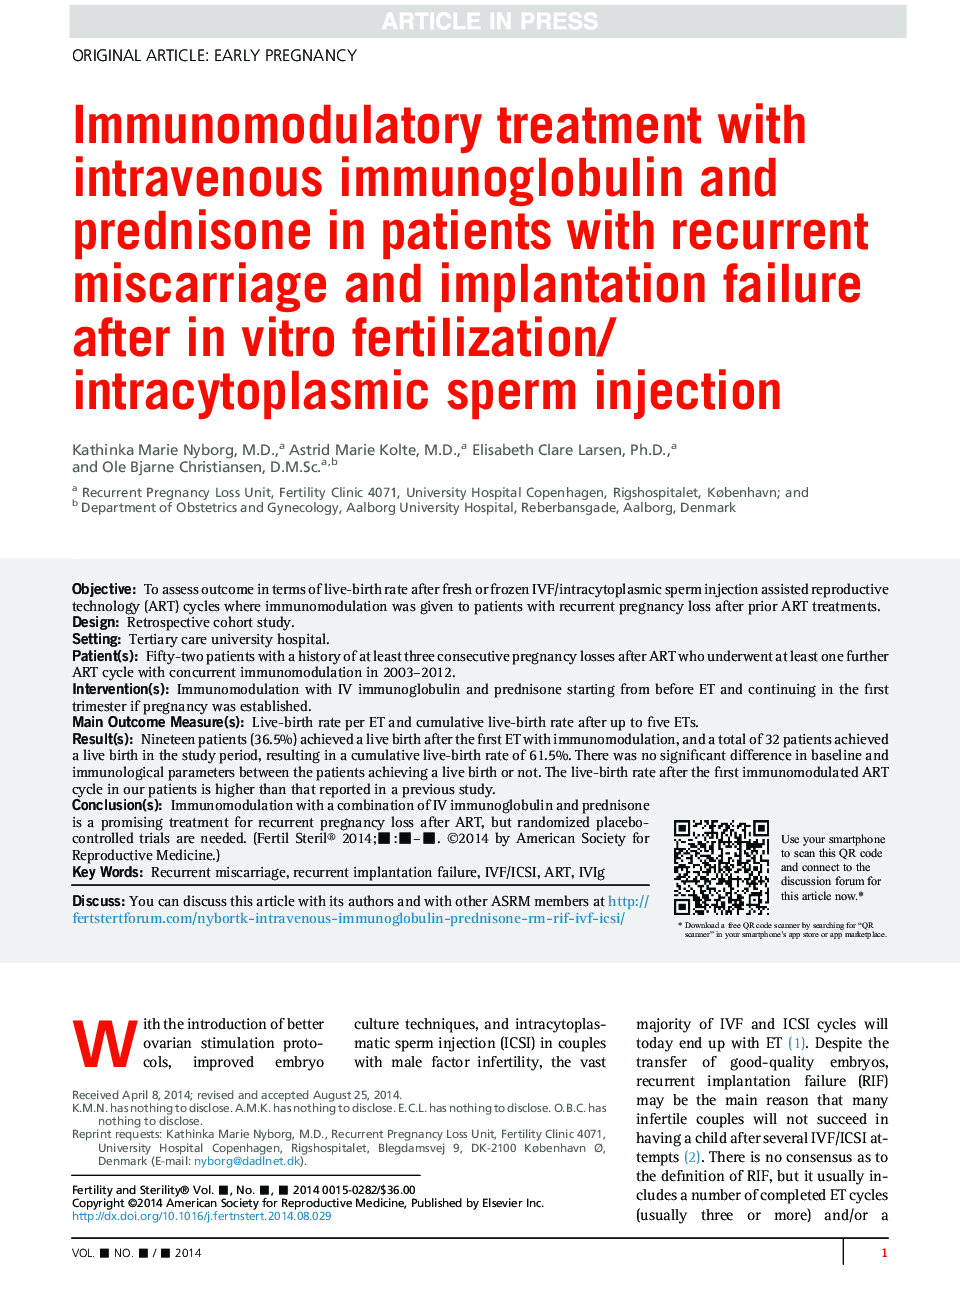 Immunomodulatory treatment with intravenous immunoglobulin and prednisone in patients with recurrent miscarriage and implantation failure after inÂ vitro fertilization/intracytoplasmic sperm injection